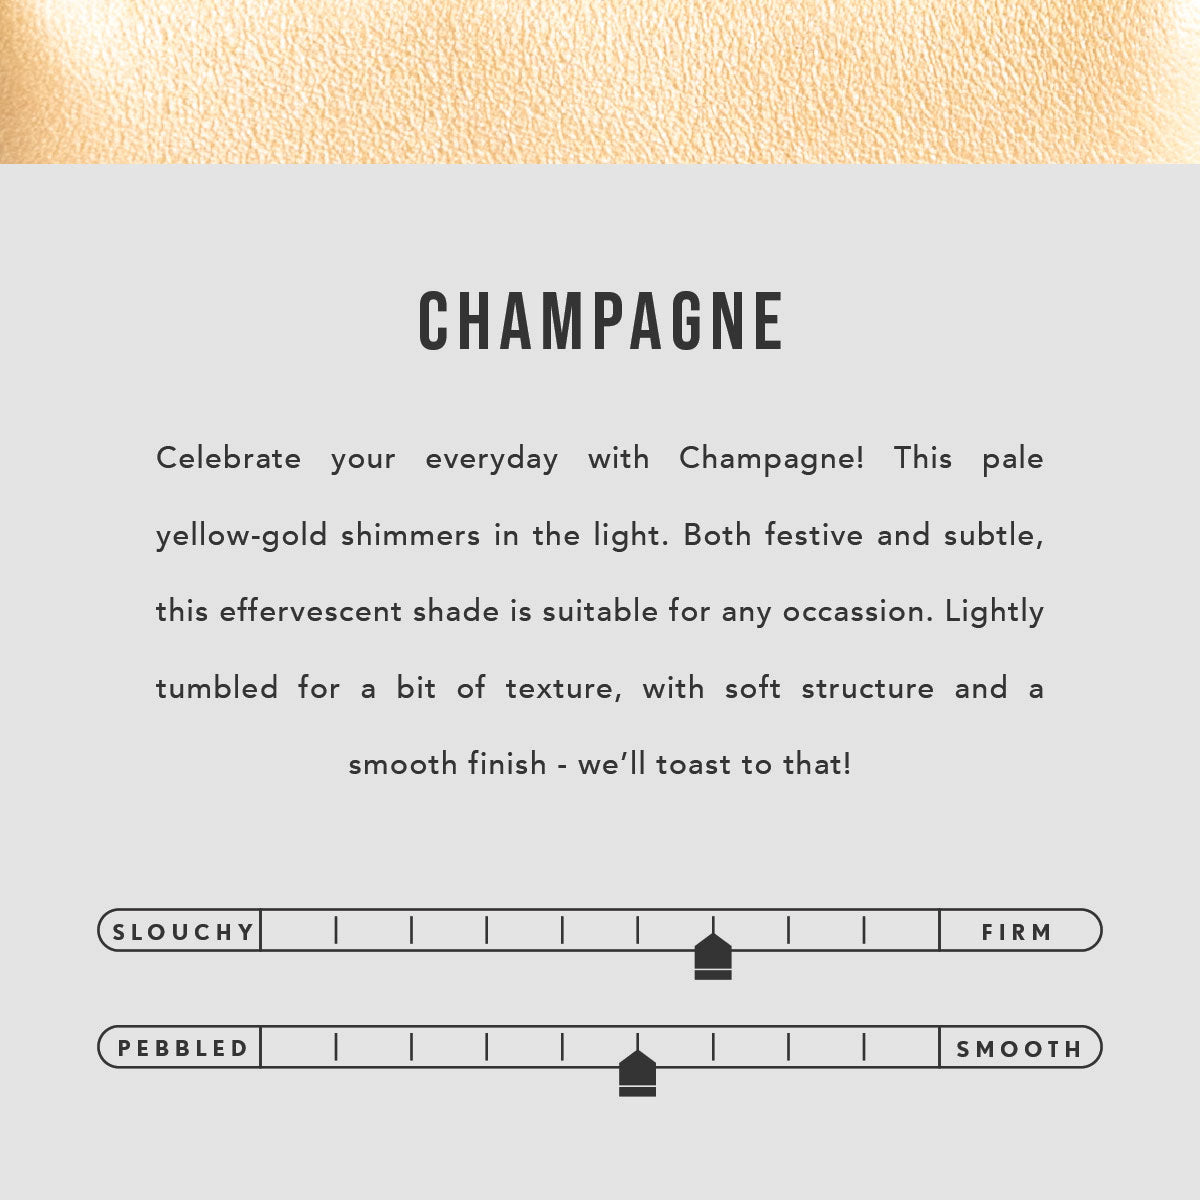 Champagne | infographic